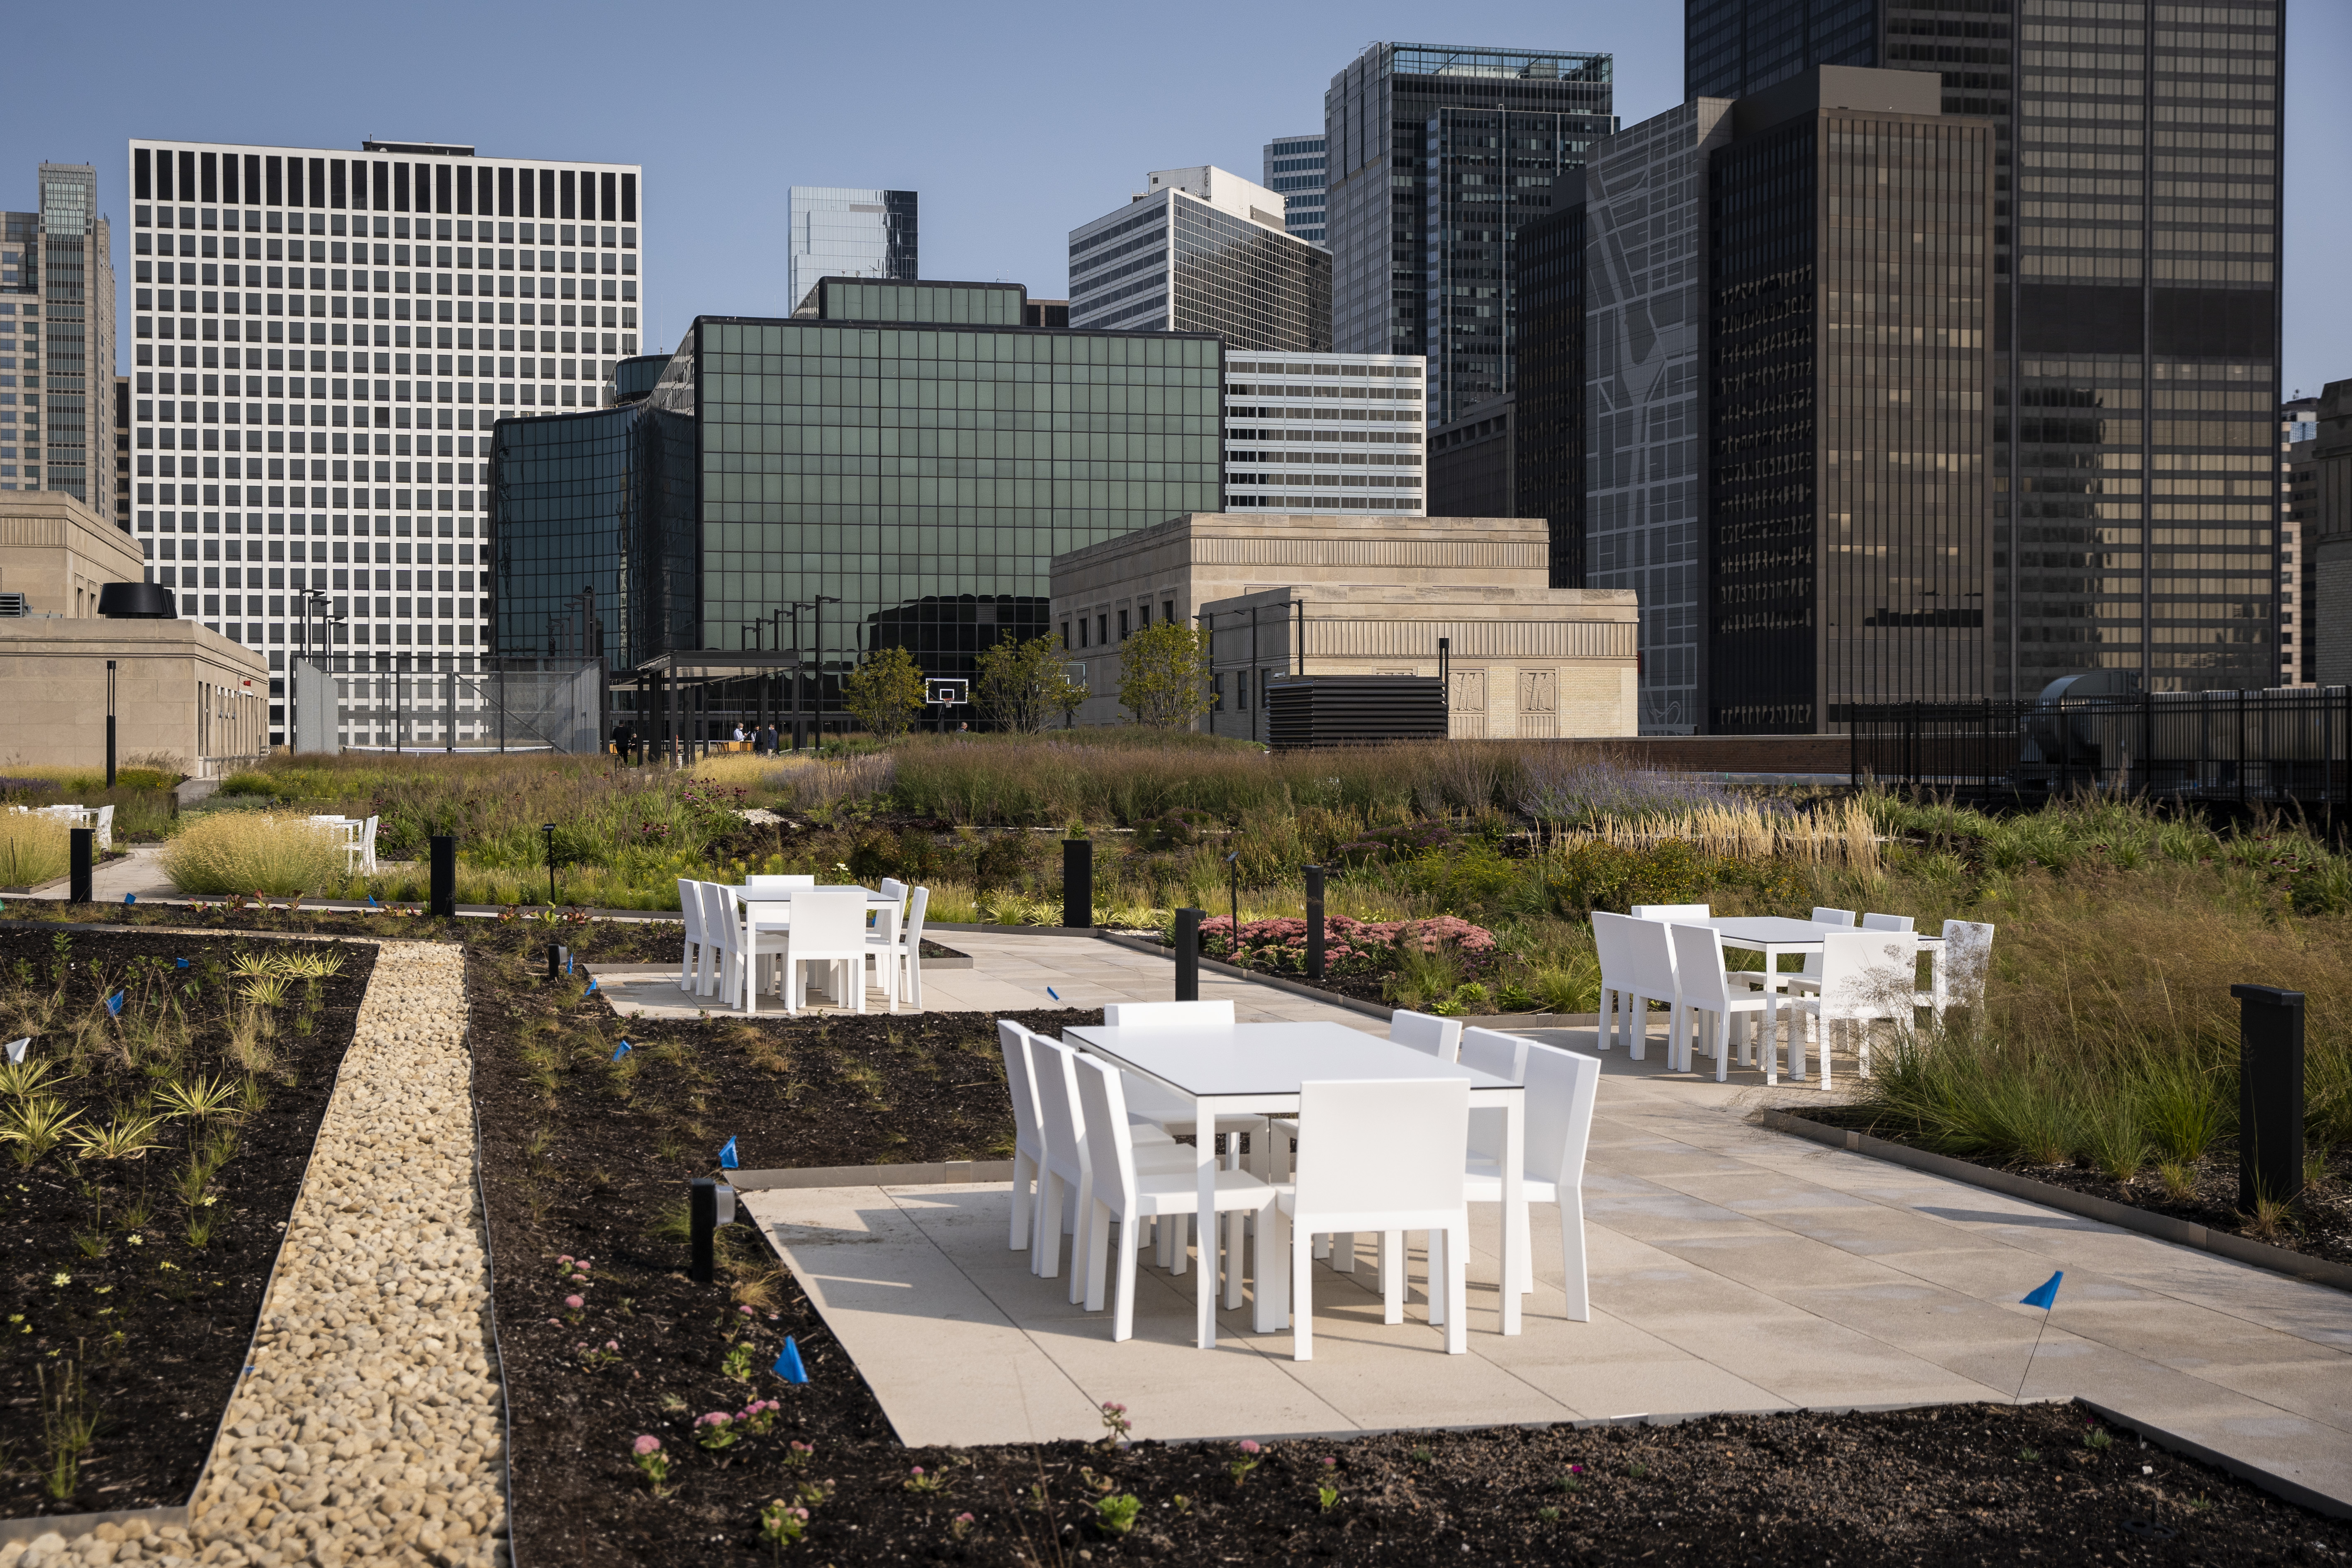 The 3.5-acre, green rooftop terrace at The Old Post Office at 433 W. Van Buren St., Monday morning, Sept. 21, 2020.